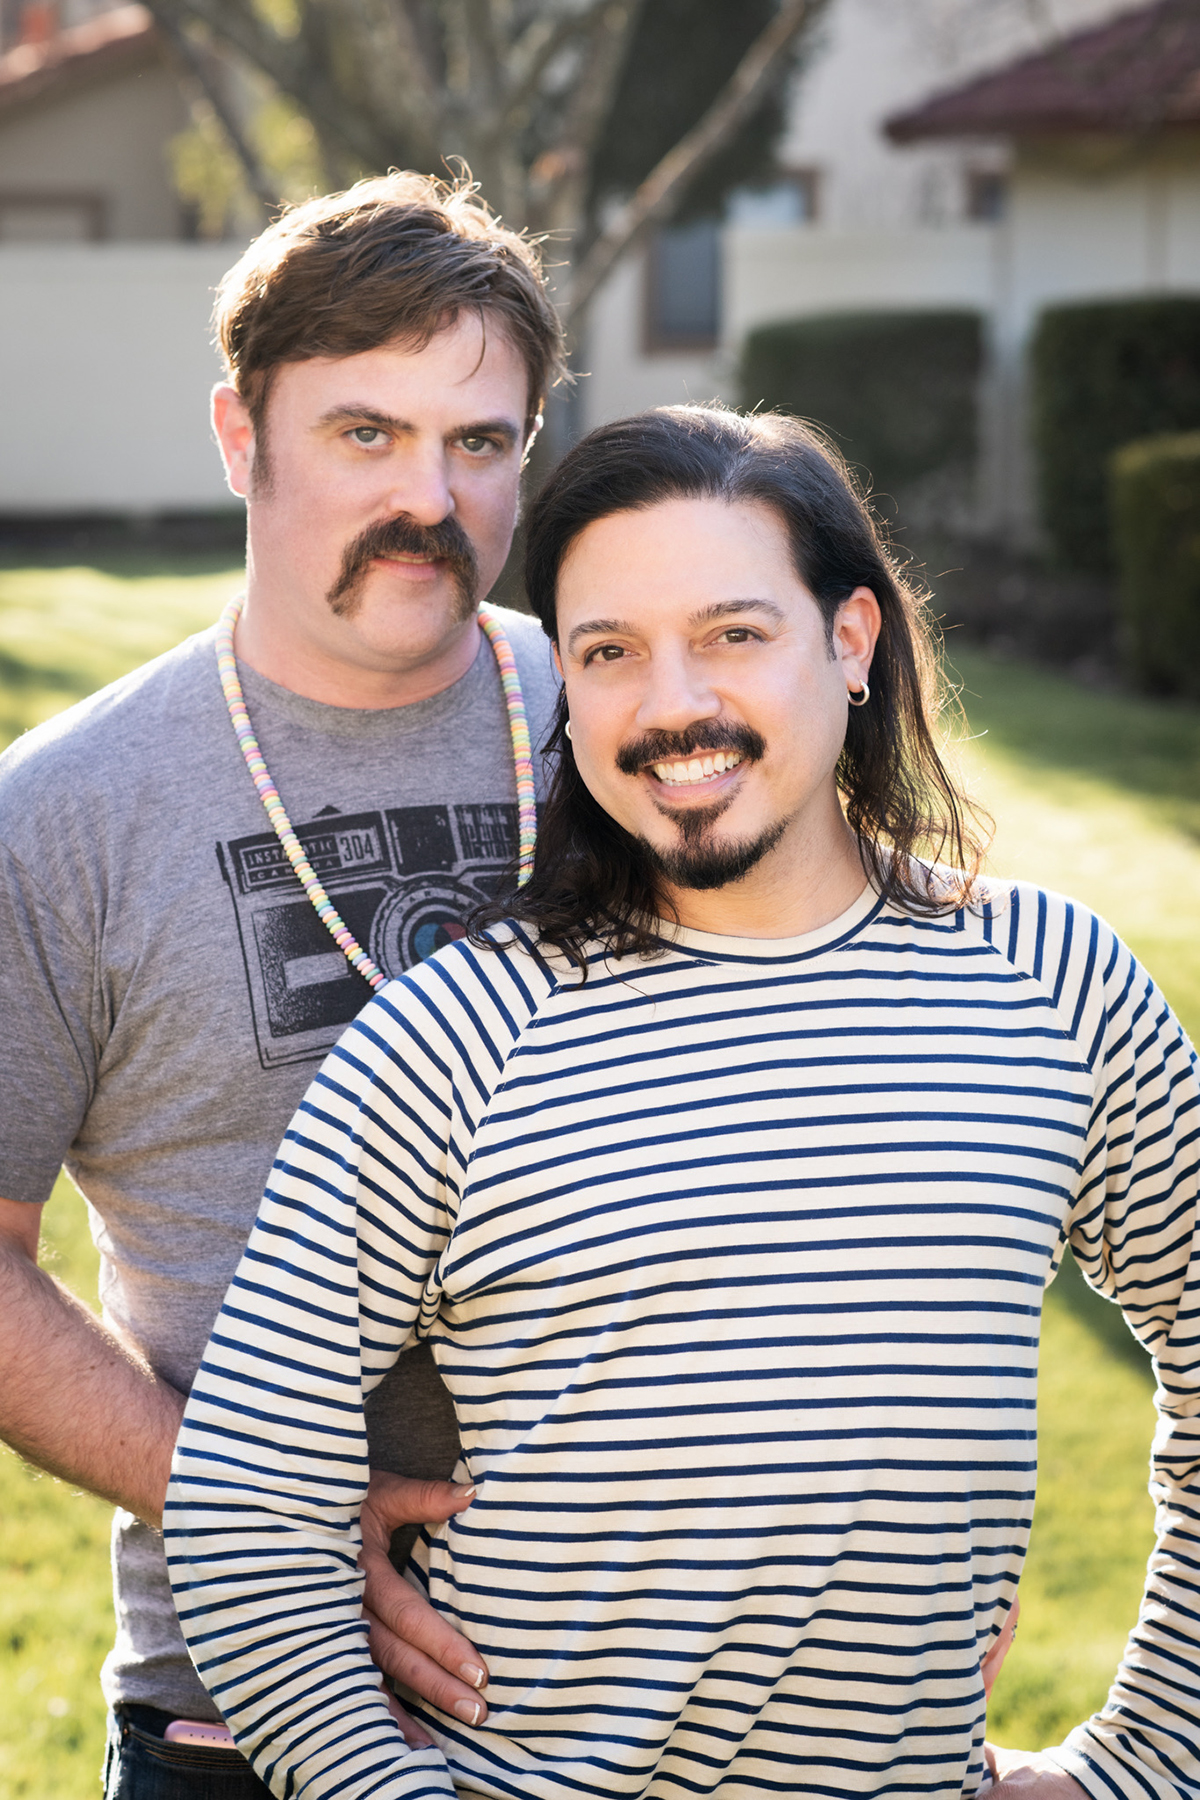 The Glitter Worthy Store was founded by San Francisco gay husbands Celso Dulay and Chris Knight to raise visibility and funds for LGBTQ+ artists and nonprofits in 2020.